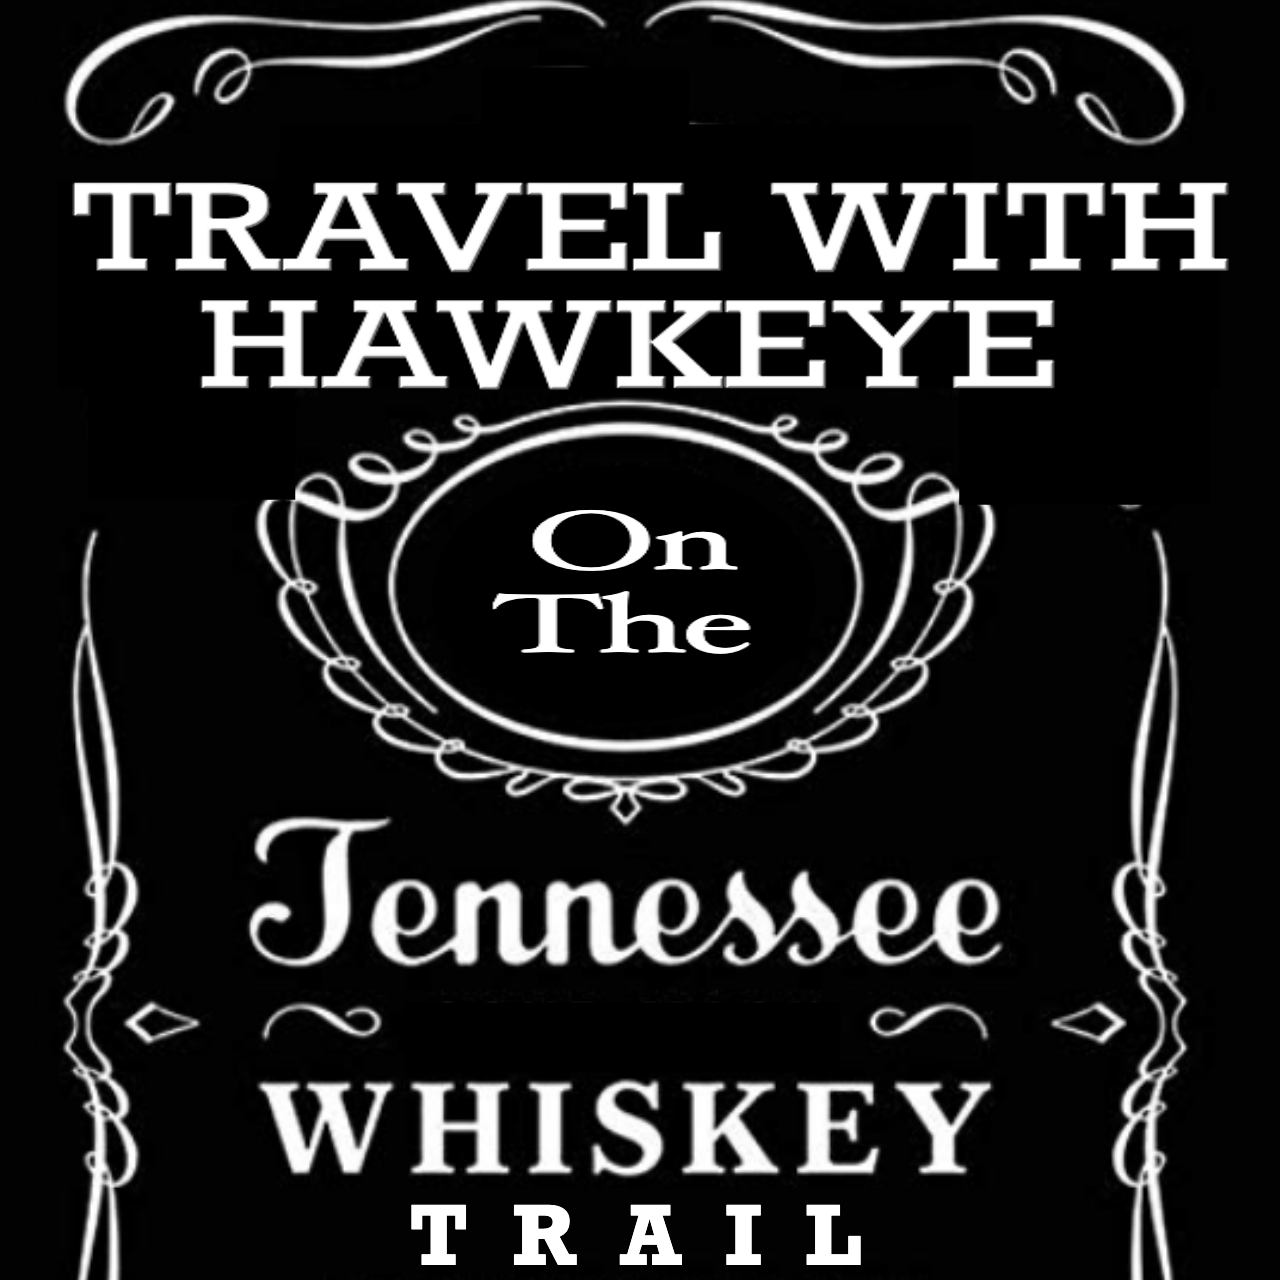 Episode 118 - We discover the Tennessee Whiskey  Trail with Jack Daniels Master Distiller Jeff Arnett